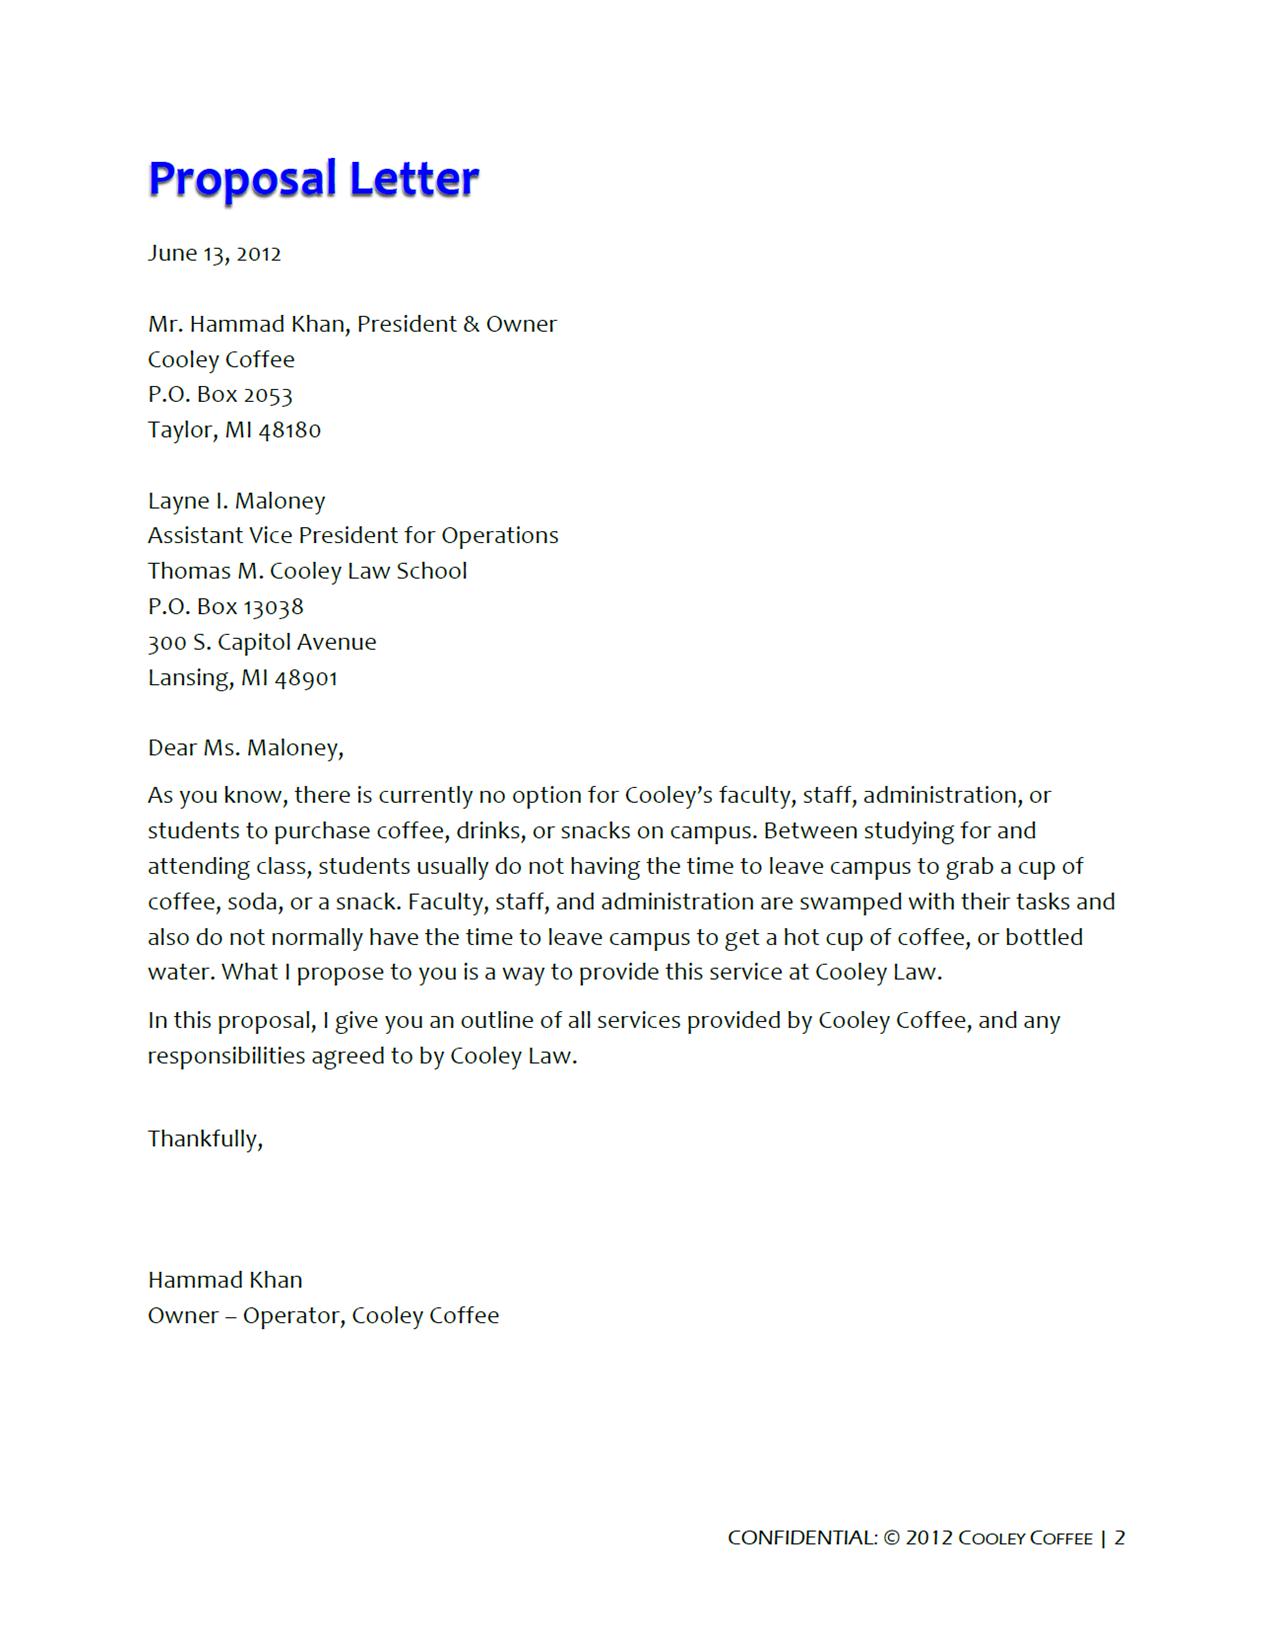 how to finish a business proposal letter